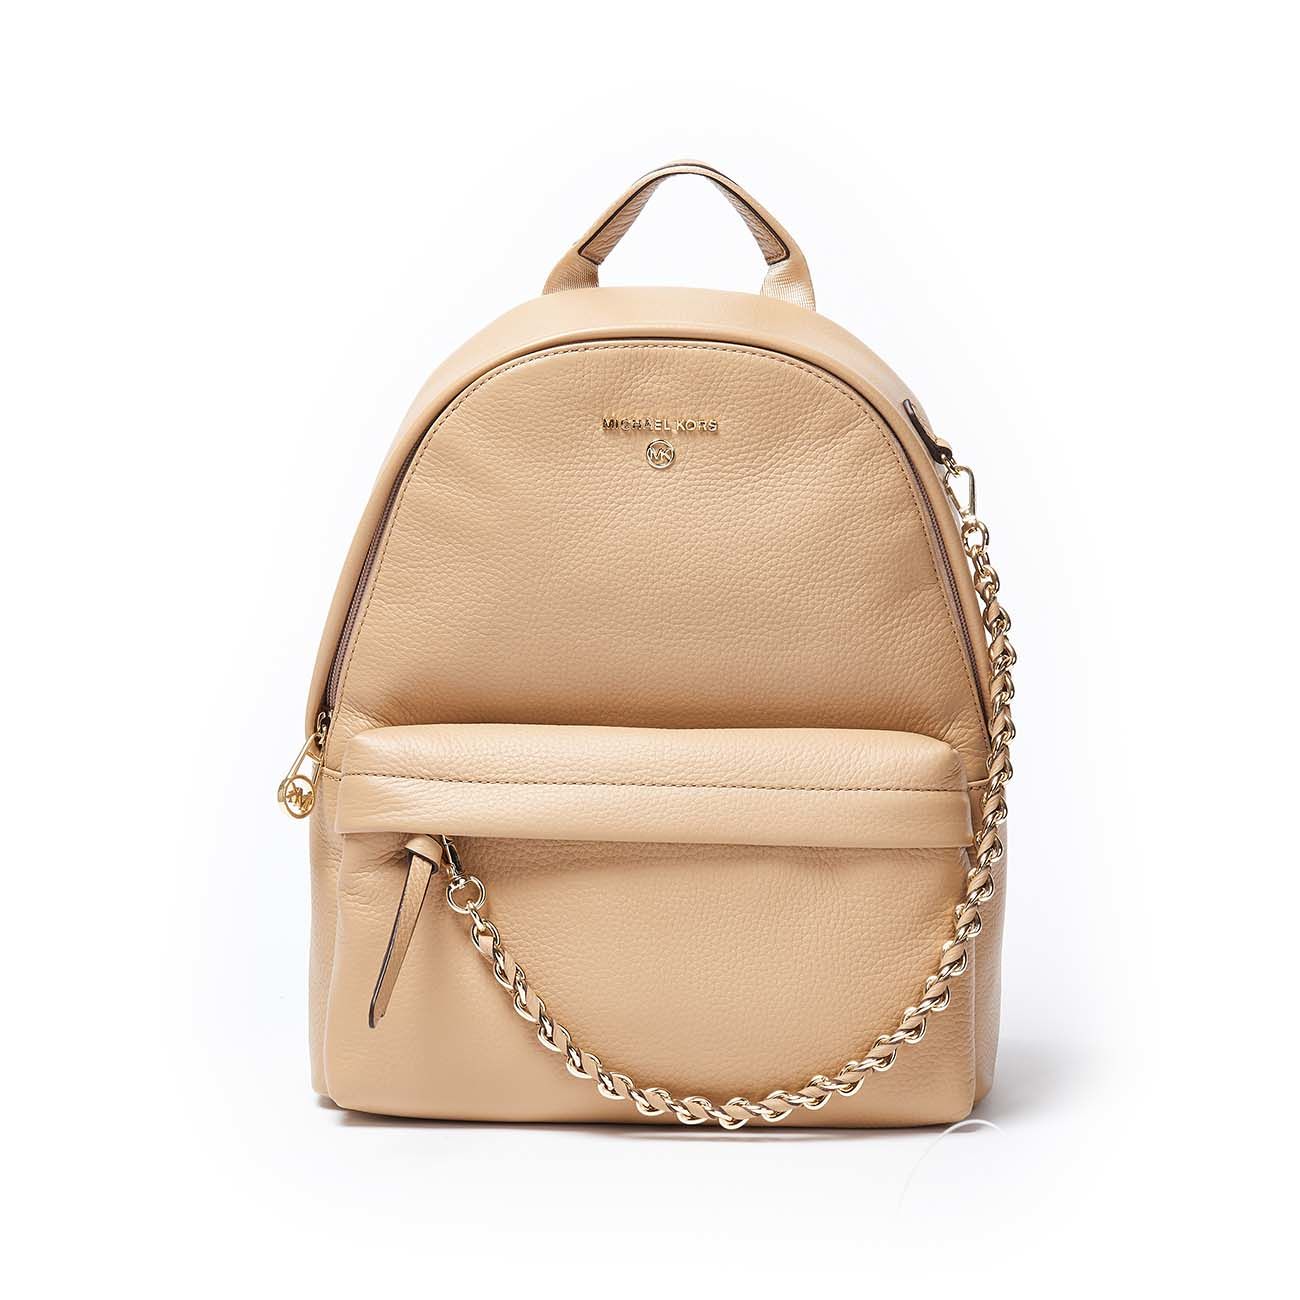 Michael Kors Erin black and gold leather backpack - Michael Kors - Purchase  on Ventis.